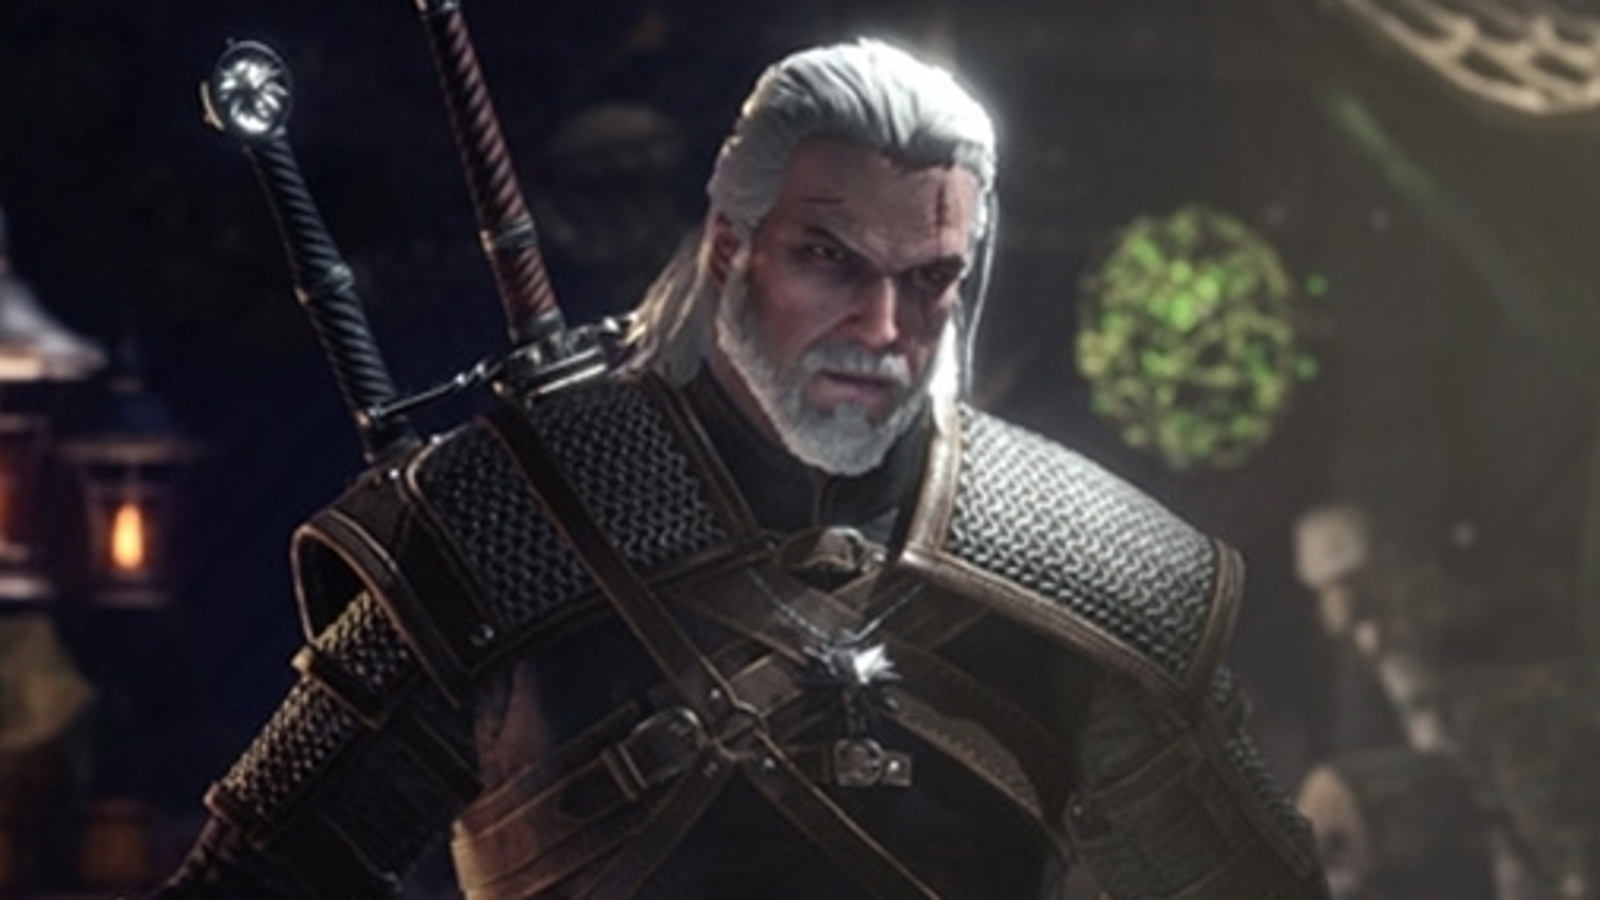 Steam Community :: Guide :: The Witcher - Wallpapers